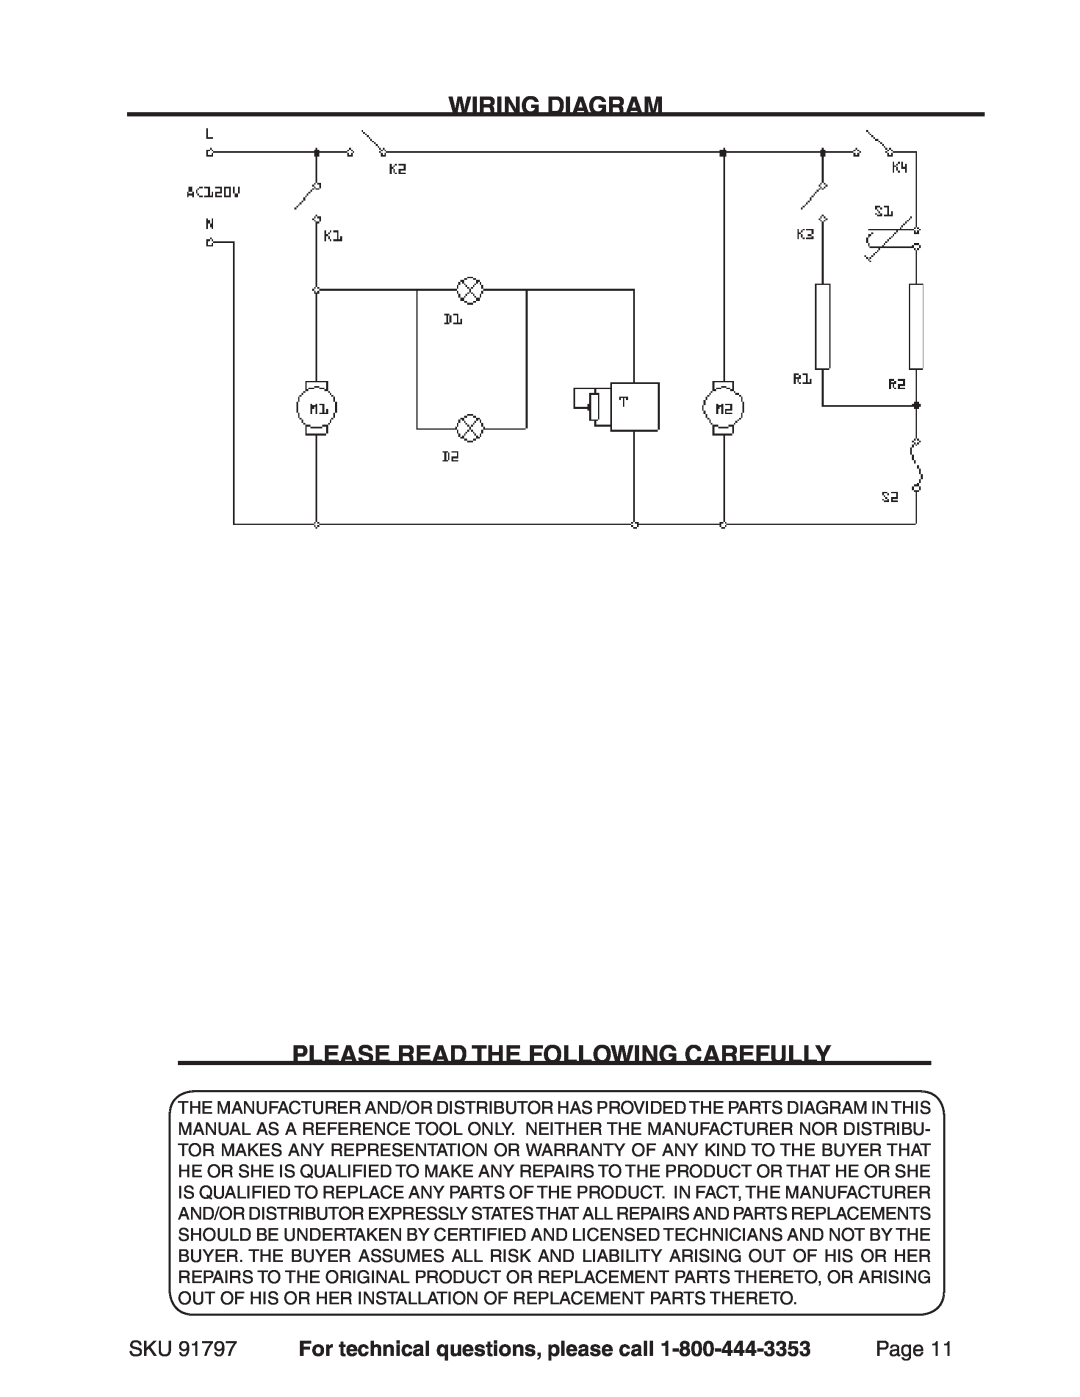 Chicago Electric ELECTRIC FIREPLACE HEATER WITH SINGLE GLASS DOOR Wiring Diagram, Please Read The Following Carefully 